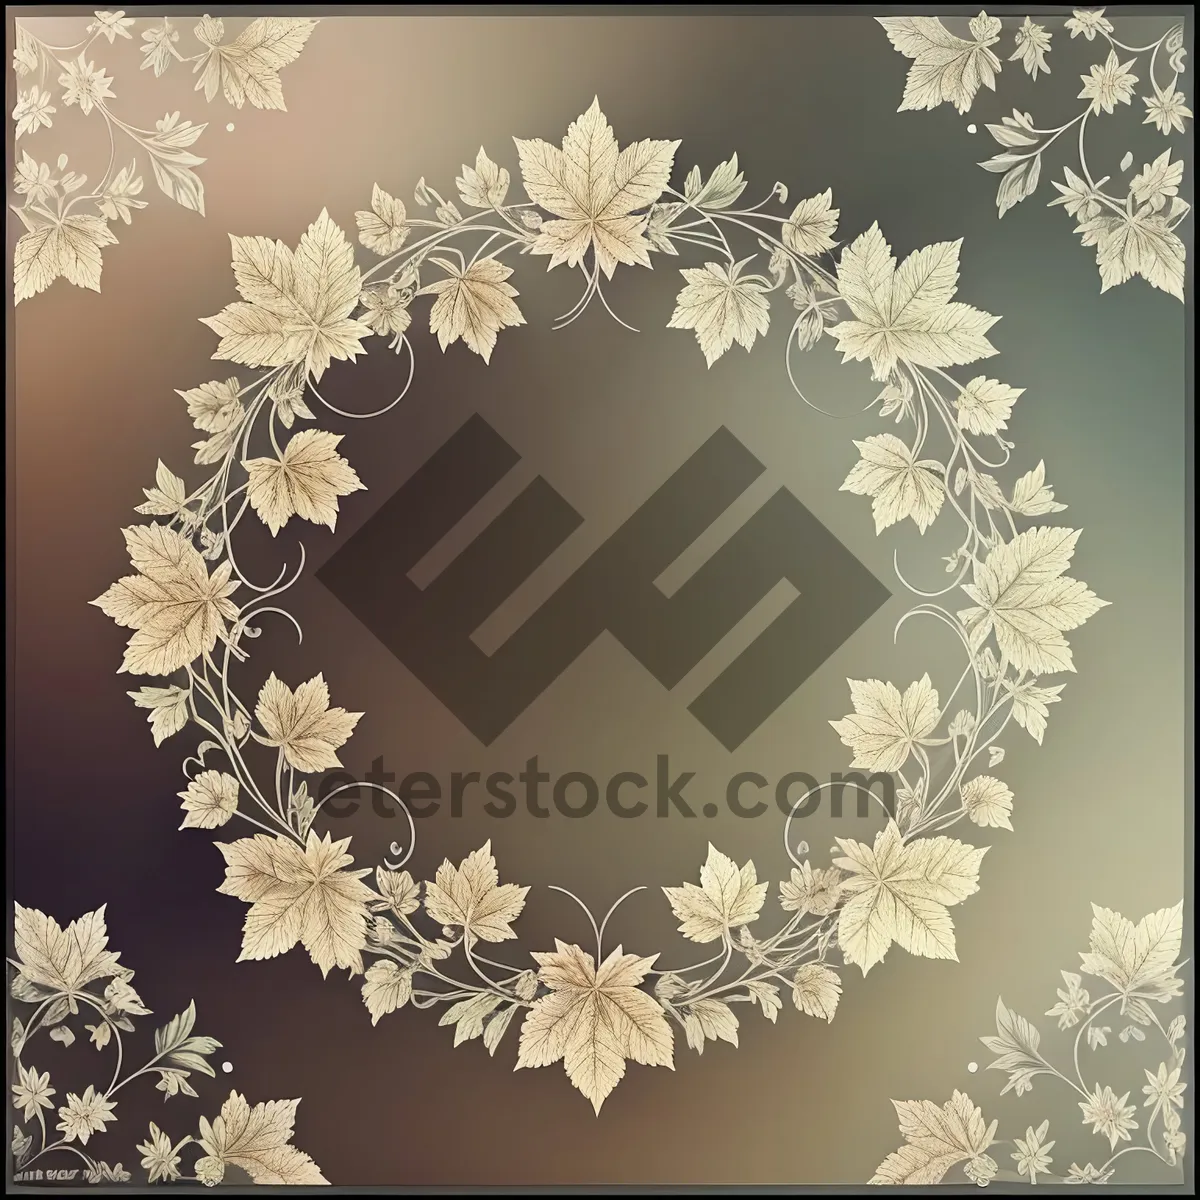 Picture of Frosty Winter Floral Pattern in Retro Style